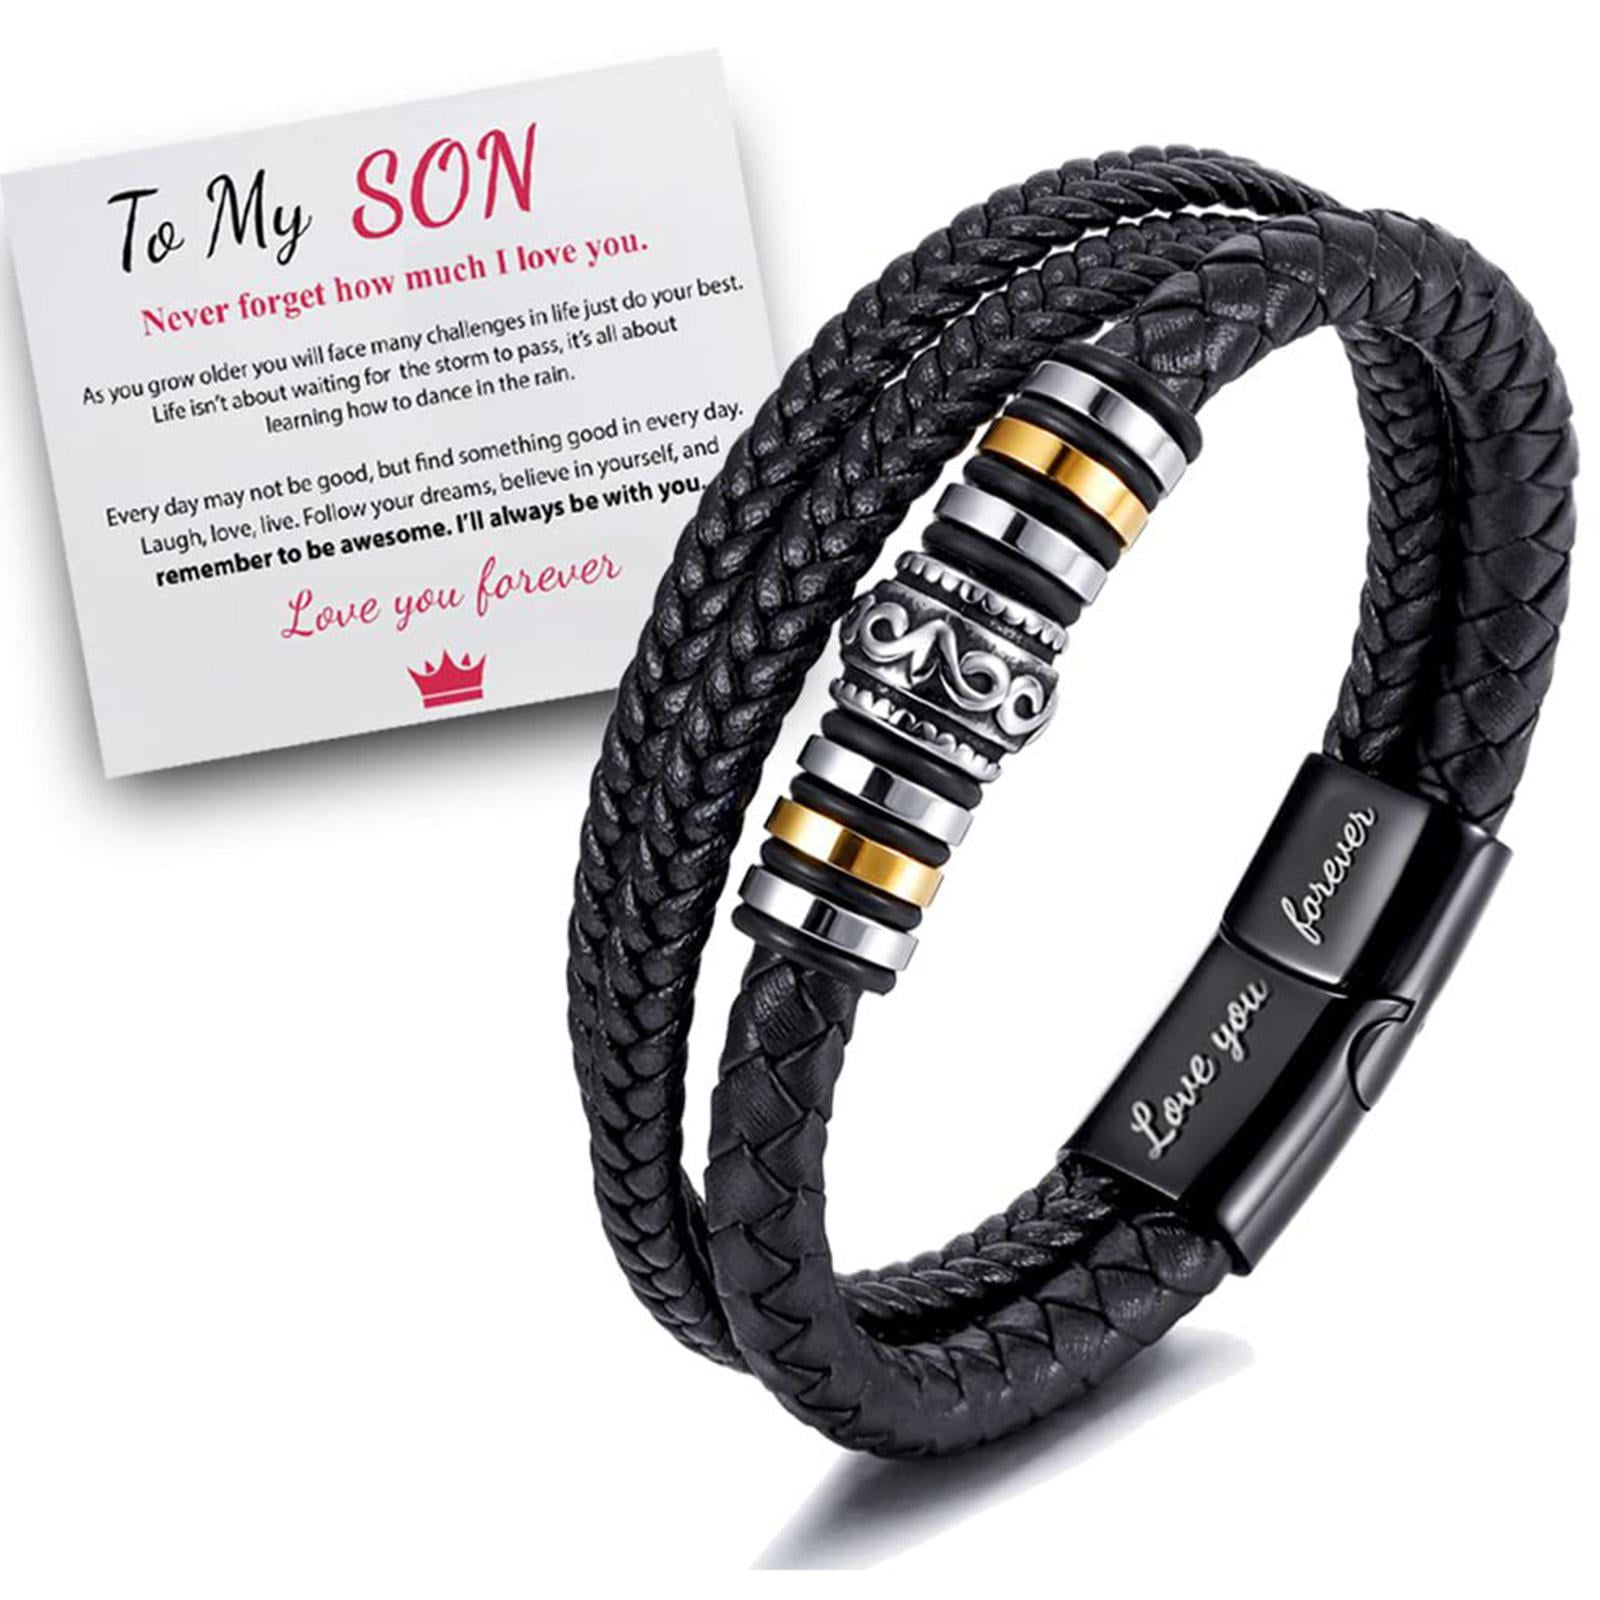 to My Son Bracelet from Mom with Message Card,Handmade Braided Leather Cross Bracelet Men Stainless Steel Inspirational Wristband Meaningful Bracelet